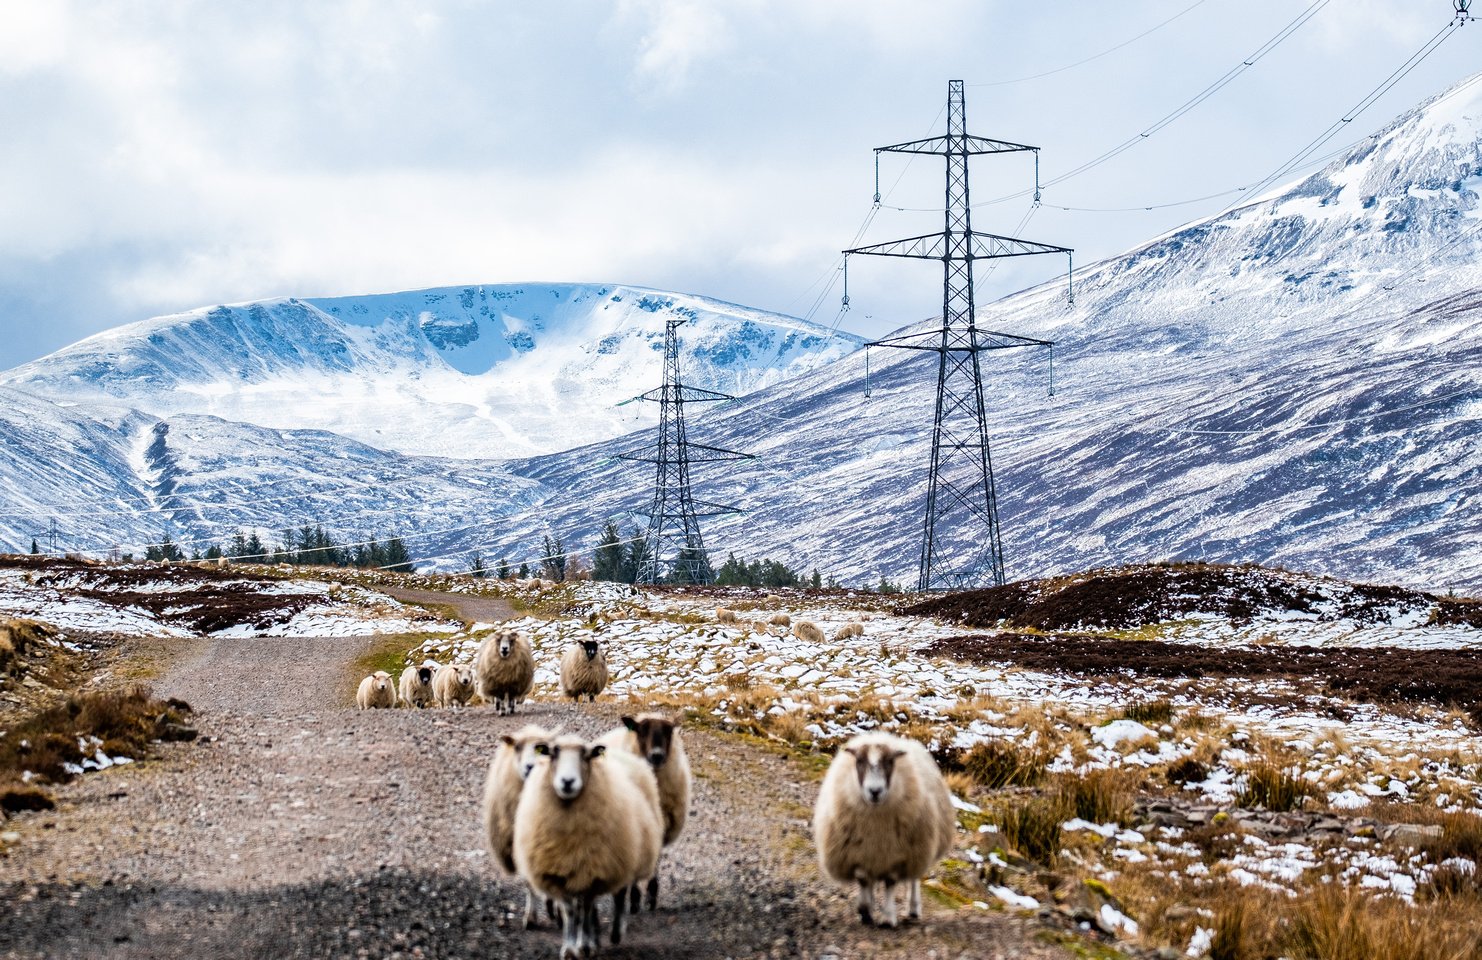 A flock of sheep stand in front of transmission towers against a snowy Scottish landscape